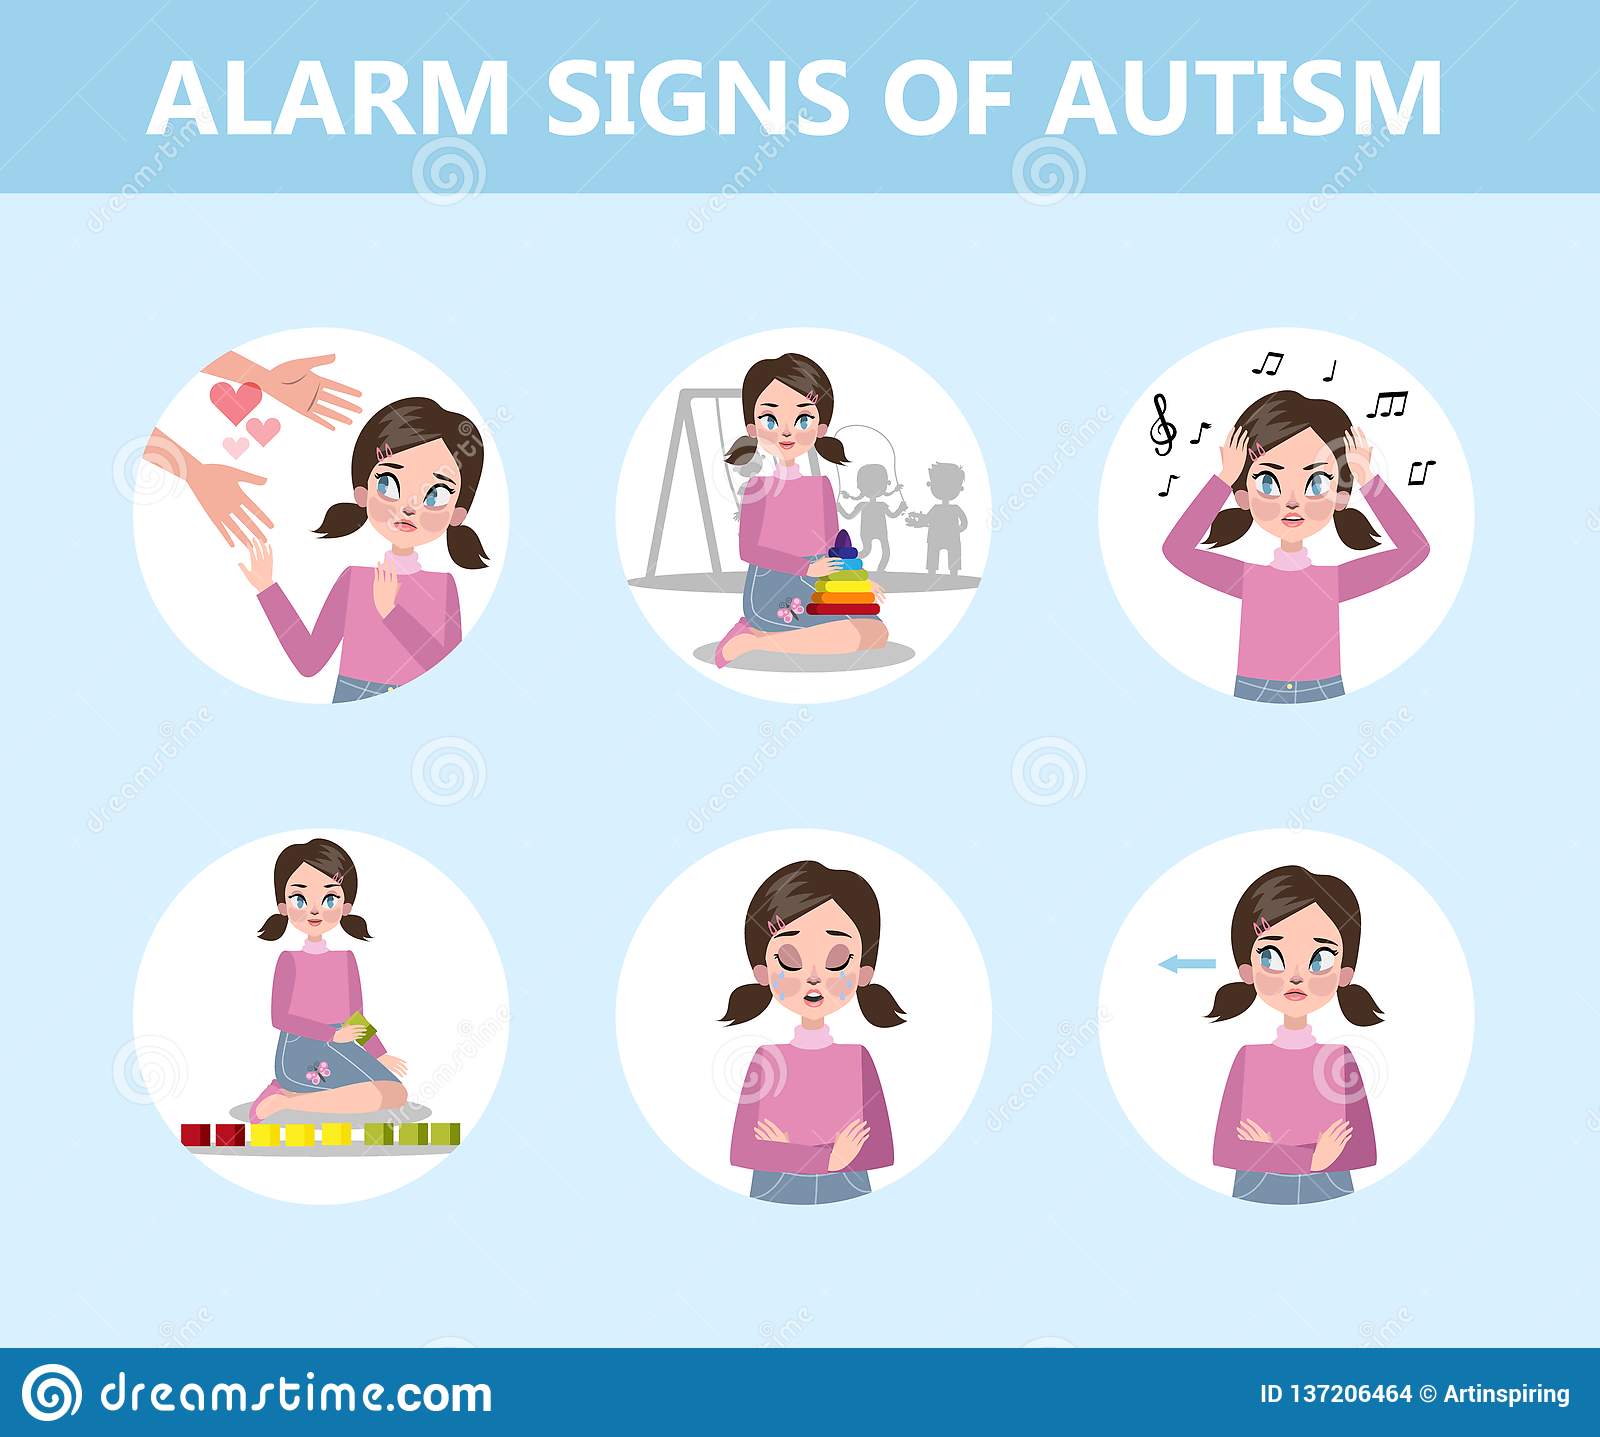 Autism Signs Infographic For A Parent. Mental Health ...